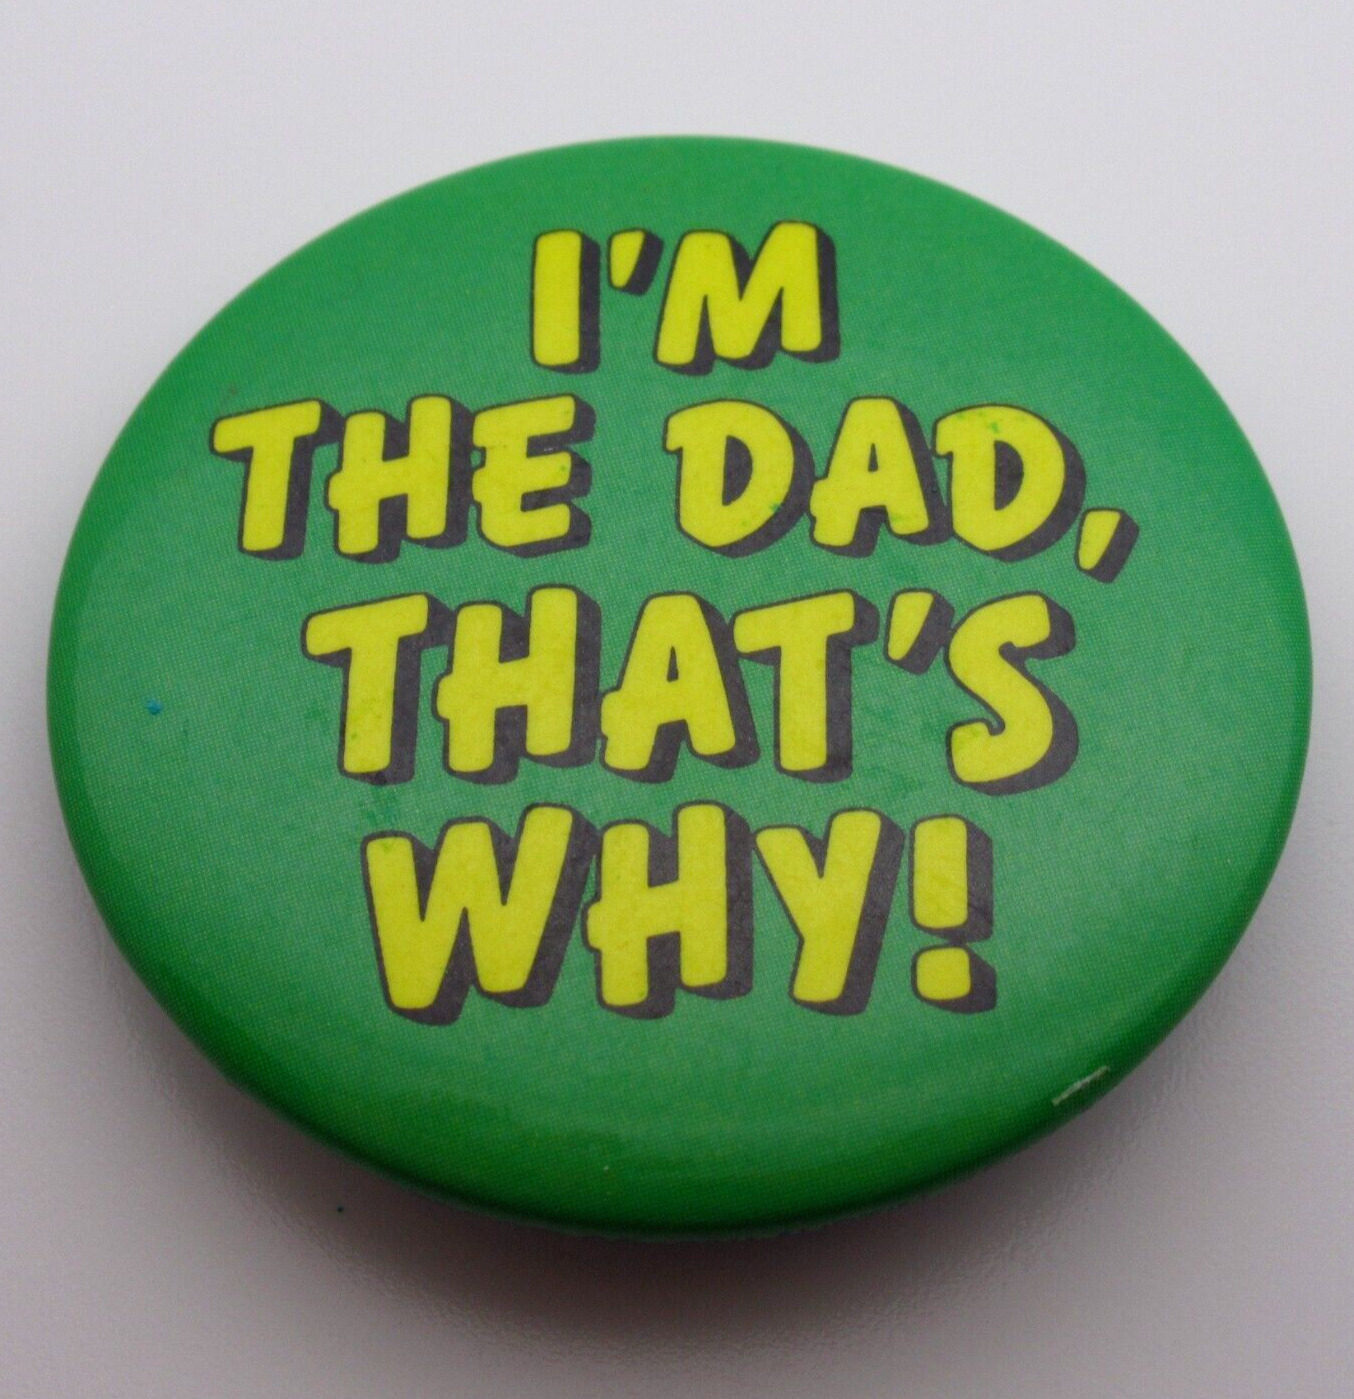 I'm The Dad, That's Why - Dad Humor - Parenting - Vintage Pinback Button - Pin